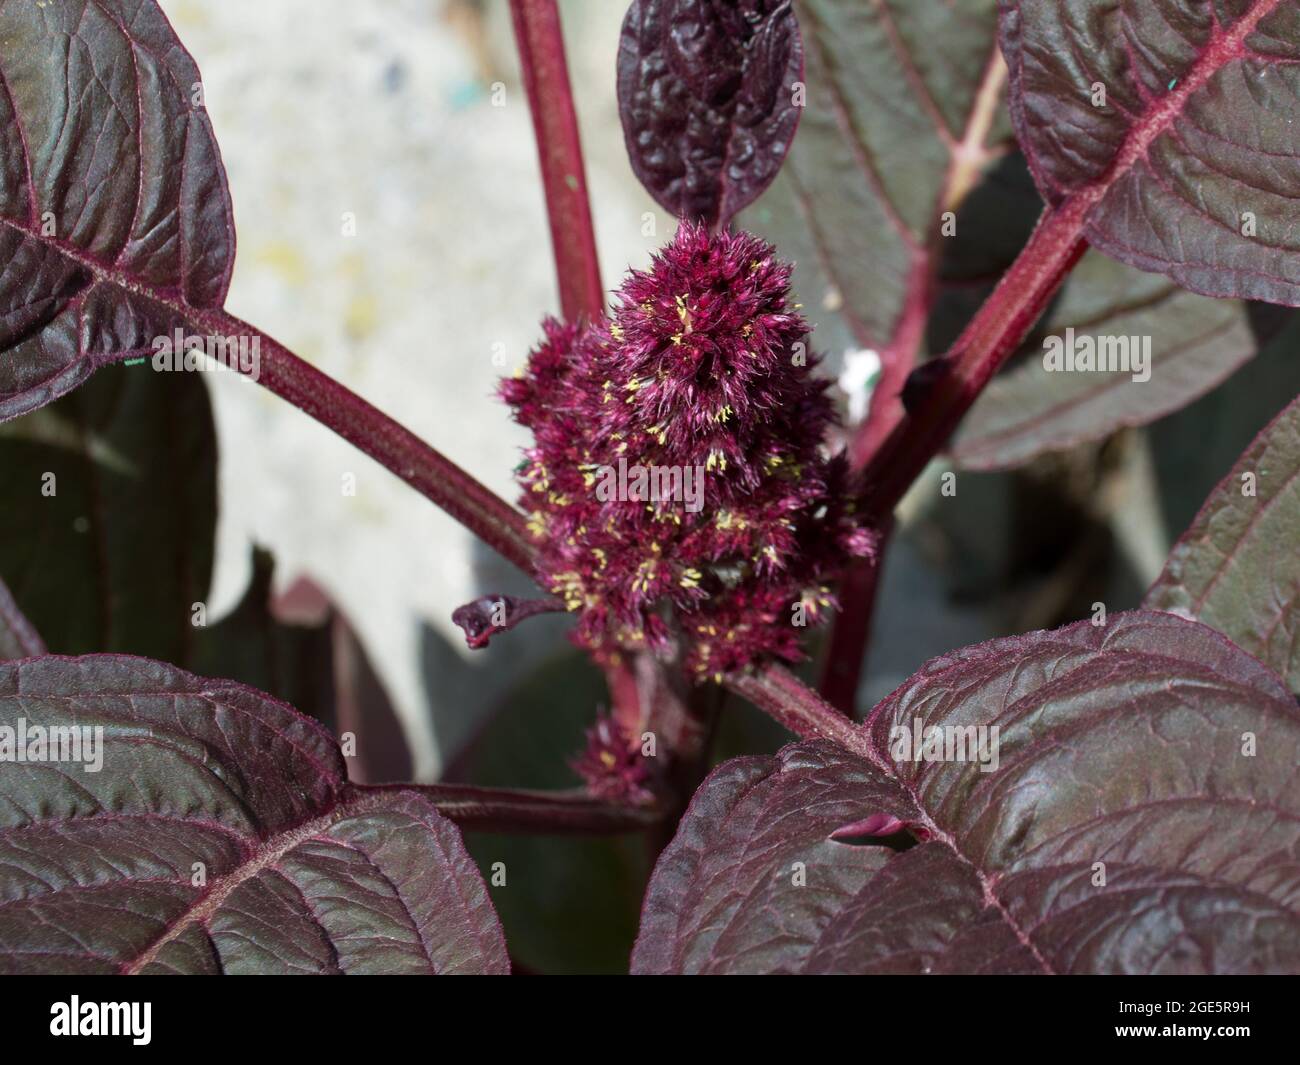 Leaves and flowers of crimson amaranth. Amaranthus is a cosmopolitan genus of annual or short-lived perennial plants. Most of the Amaranthus species a Stock Photo